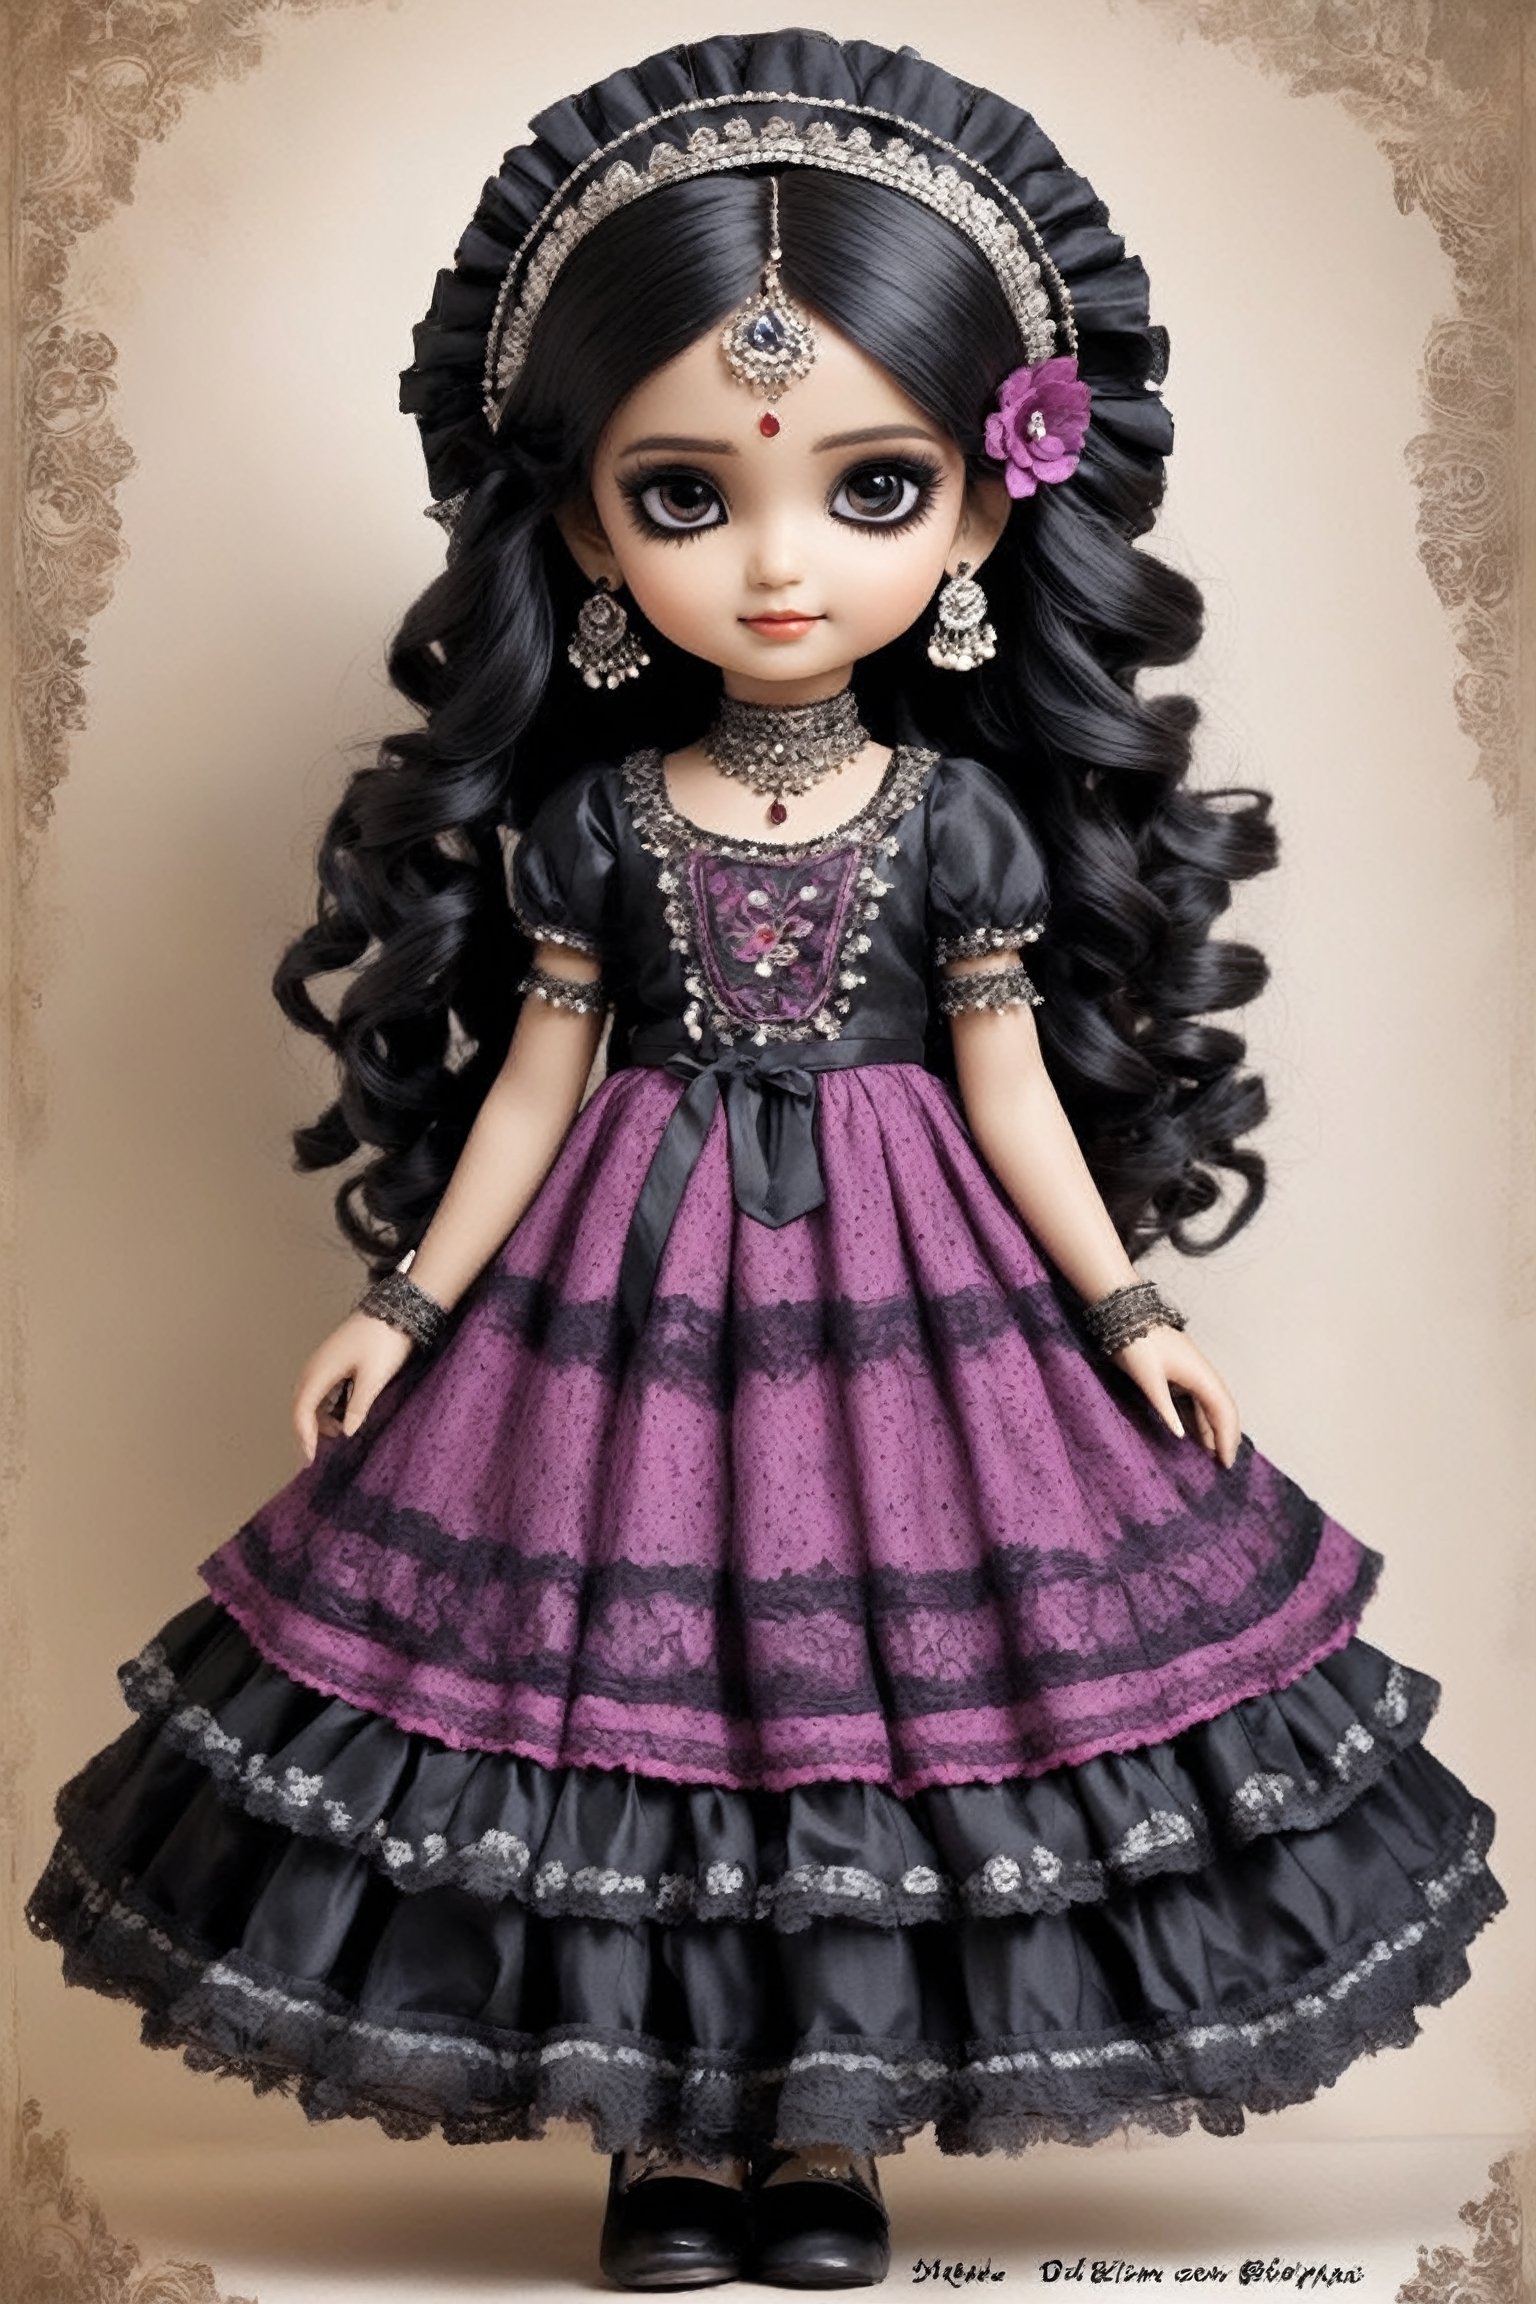 1 Little girl, Gothic Lolita-inspired Indian ethnic attire, combines the elegance of Victorian fashion with the vibrancy of Indian culture, Featuring a frilly skirt, fitted bodice, and traditional Indian colors and designs, the ensemble exudes a unique blend of whimsy and cultural fusion. Embroidery, beading, and lace add intricate details, while traditional Indian jewelry completes the look with authenticity and charm. Overall, the outfit celebrates diversity and creativity in fashion, offering a fresh take on both Gothic Lolita and Indian ethnic wear.,dal,h4n3n,Indian Model,goth person,3d figure